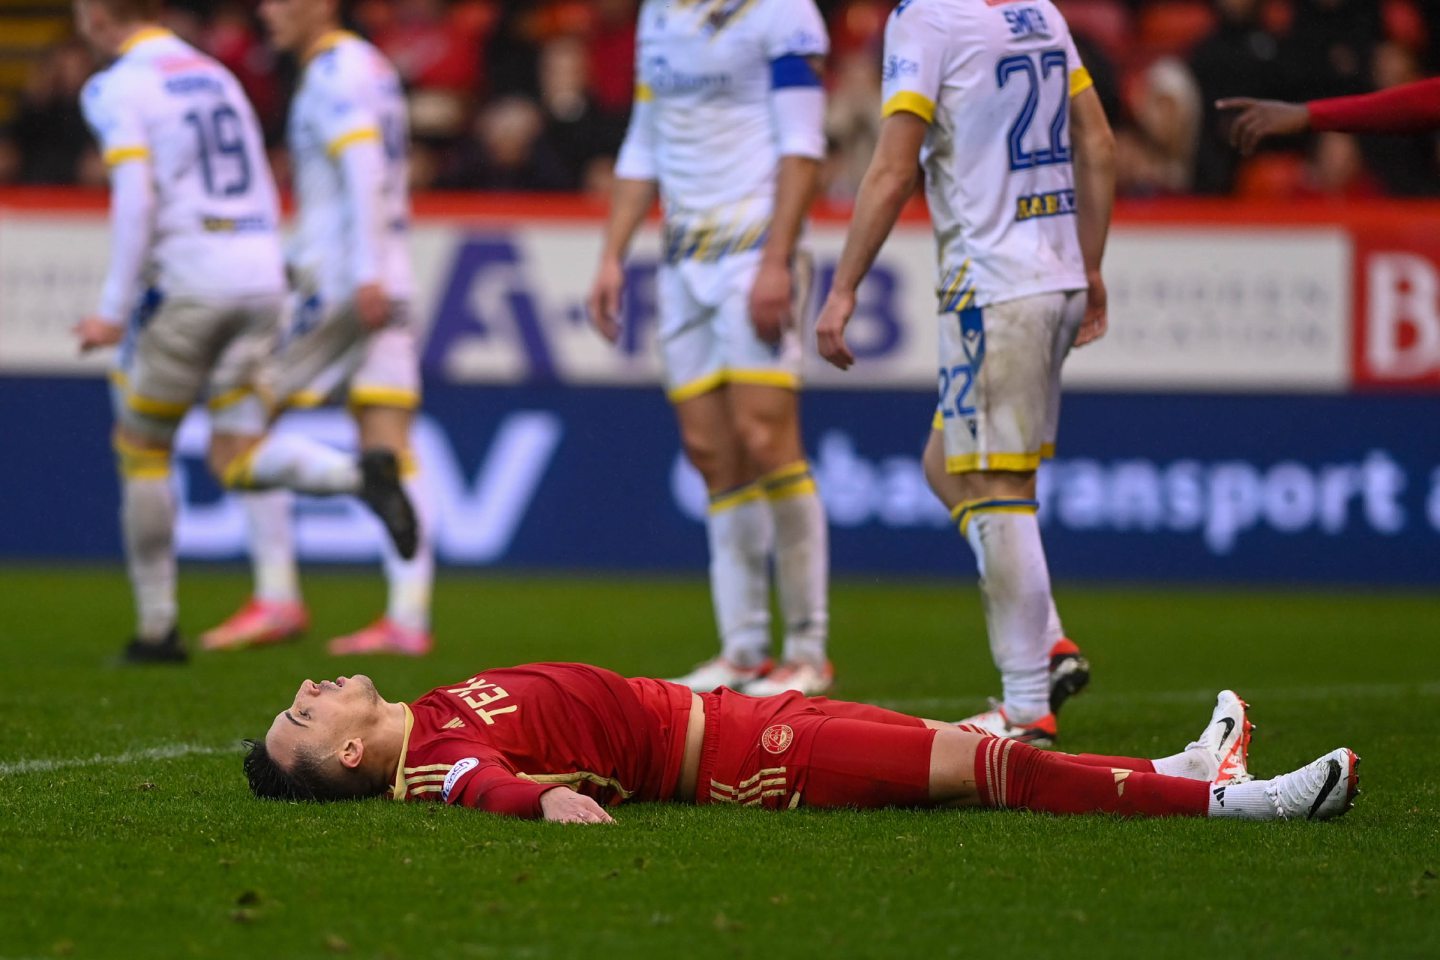 Aberdeen's Bojan Miovski lying down on the pitch, looking dejected